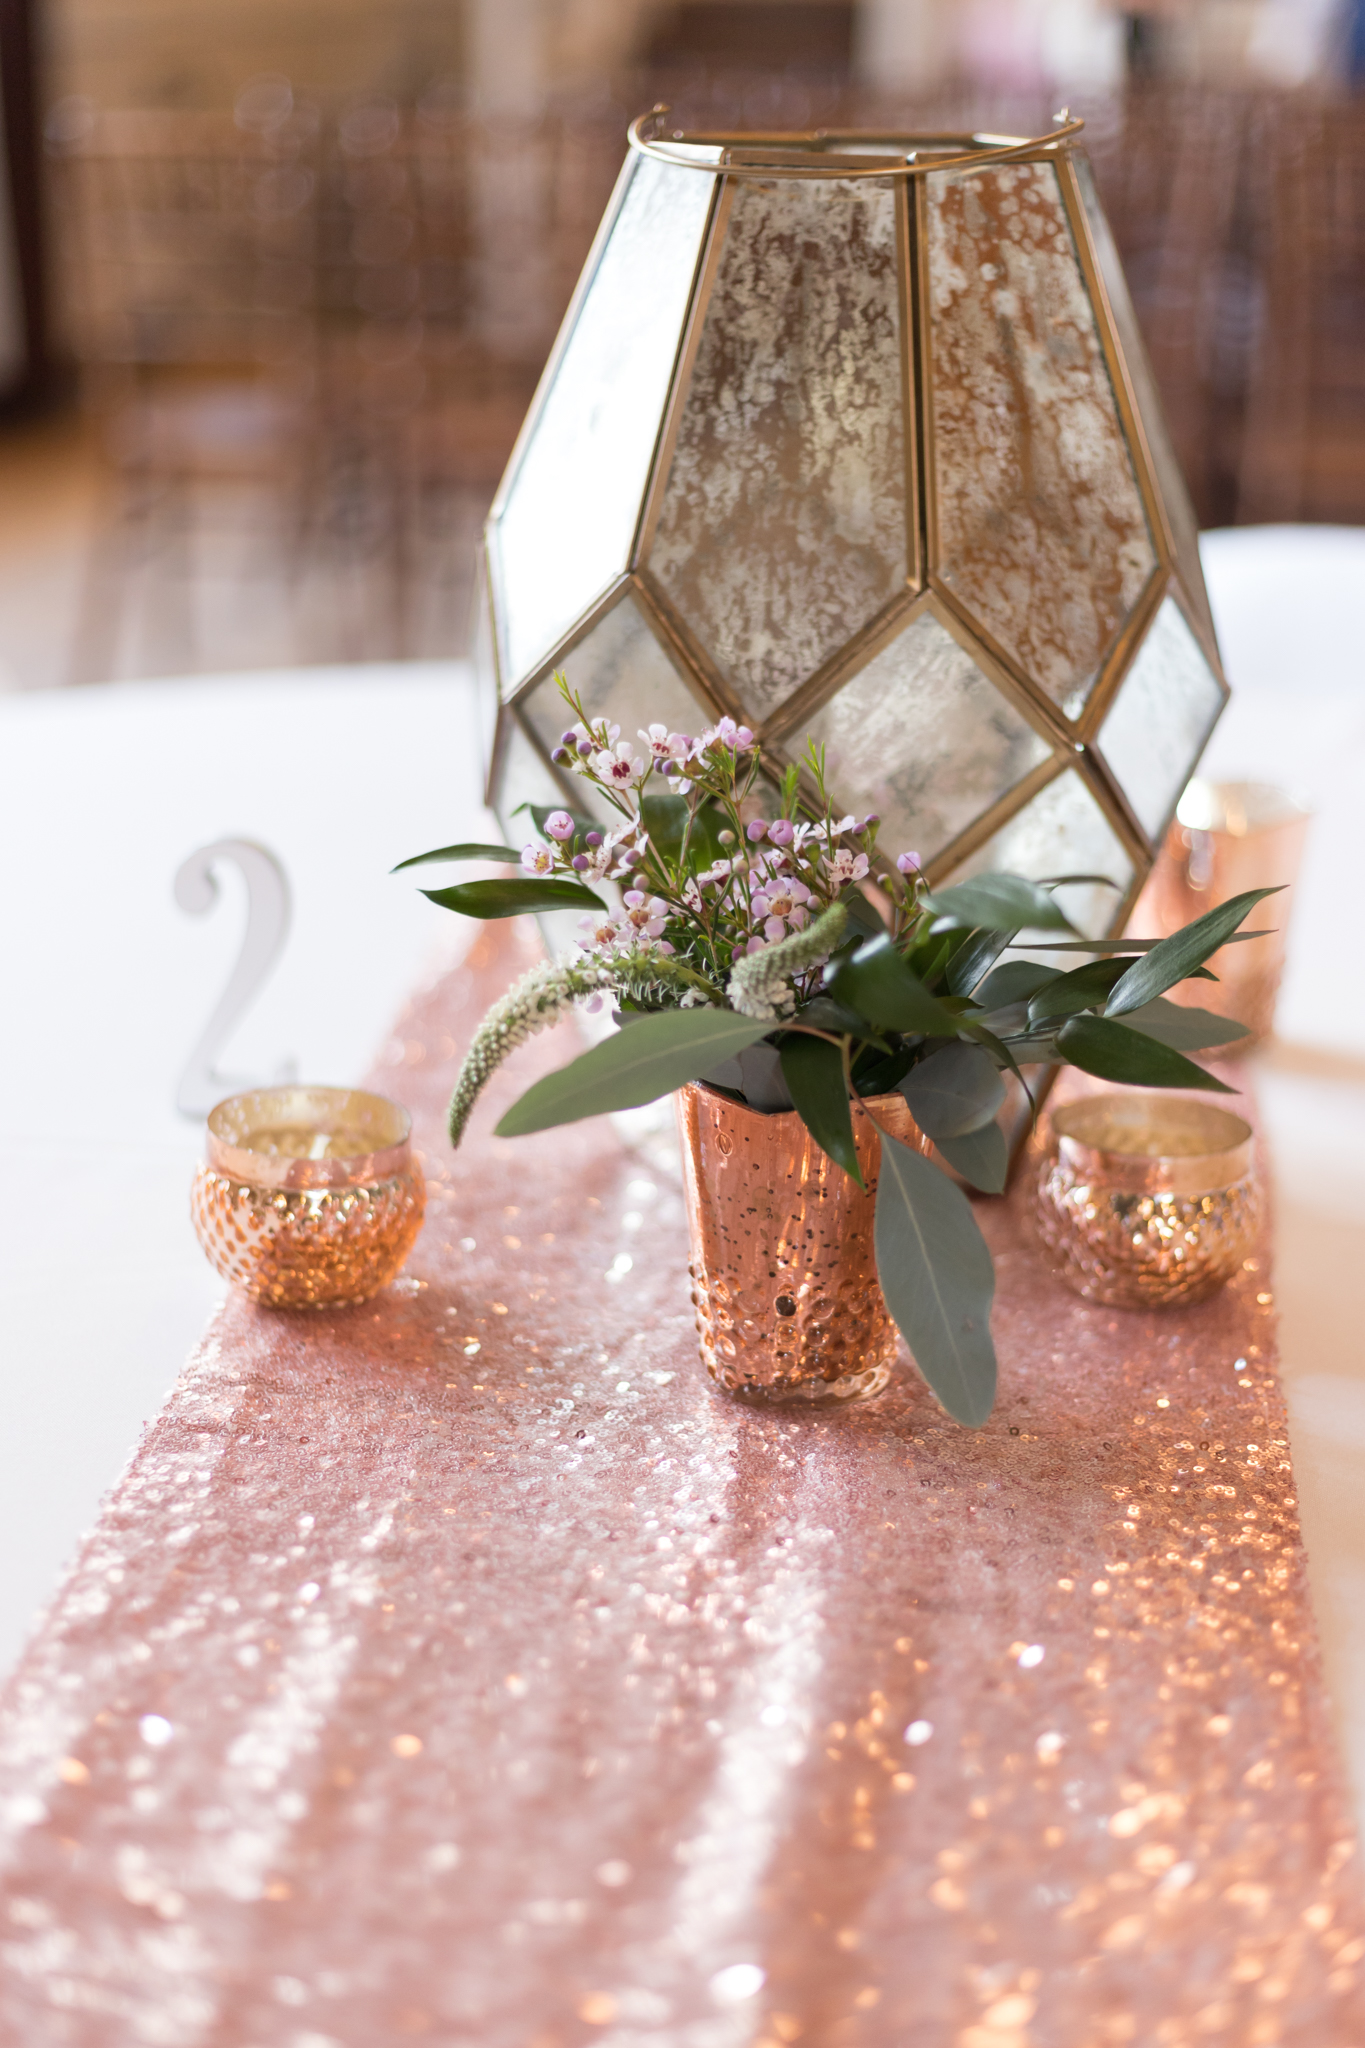 Geometric lanterns with votive candles and small vase with flowers embellished with sequin blush runner. bohemian flower types